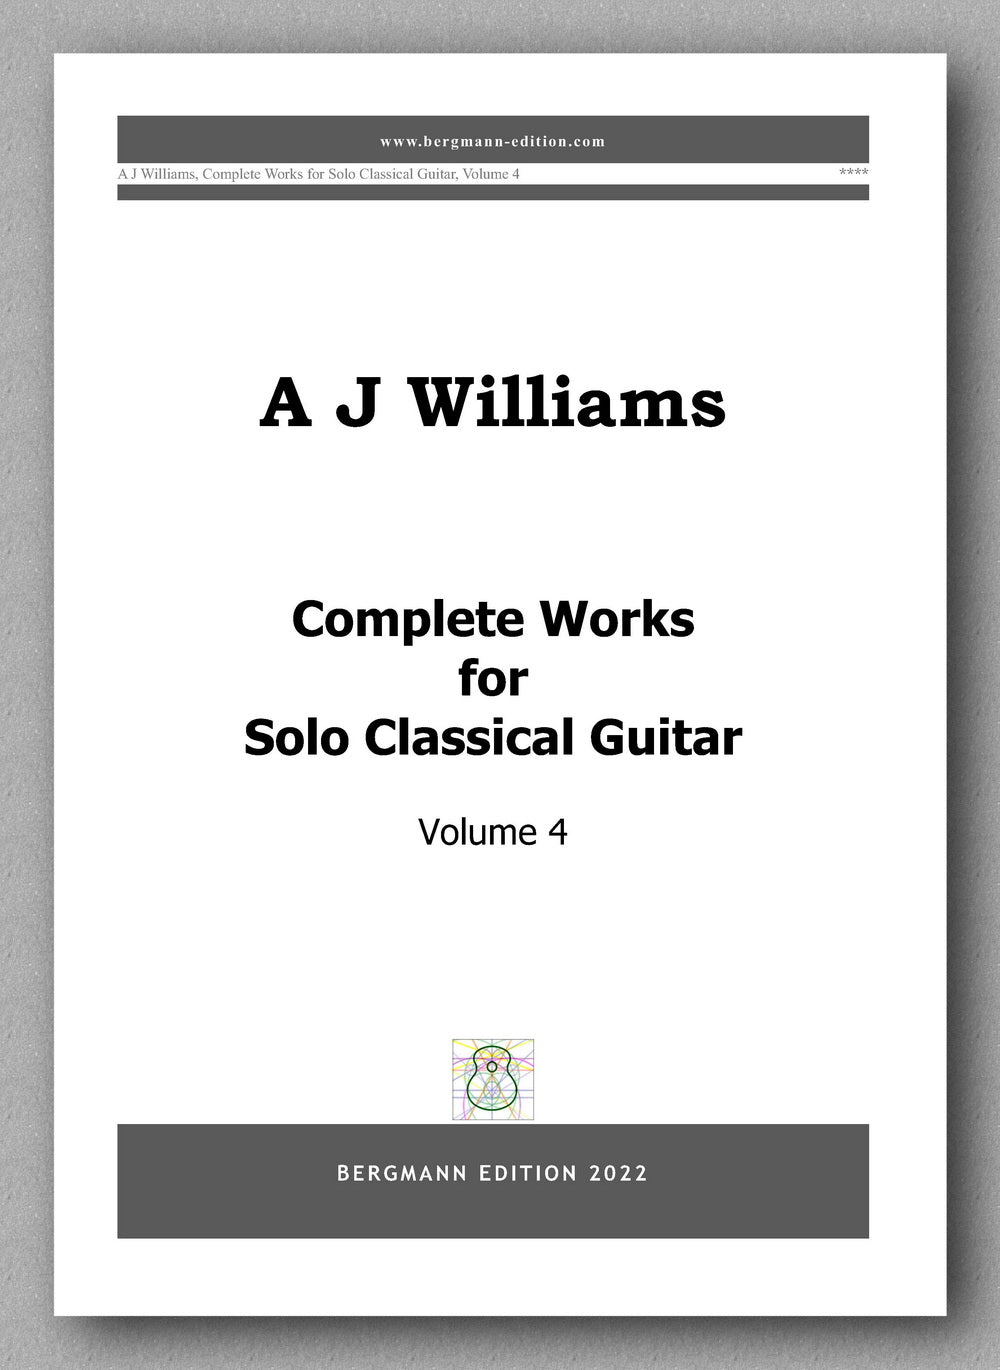 Andrew Williams, Complete Works for Solo Classical Guitar, Volume 4 - preview of the cover